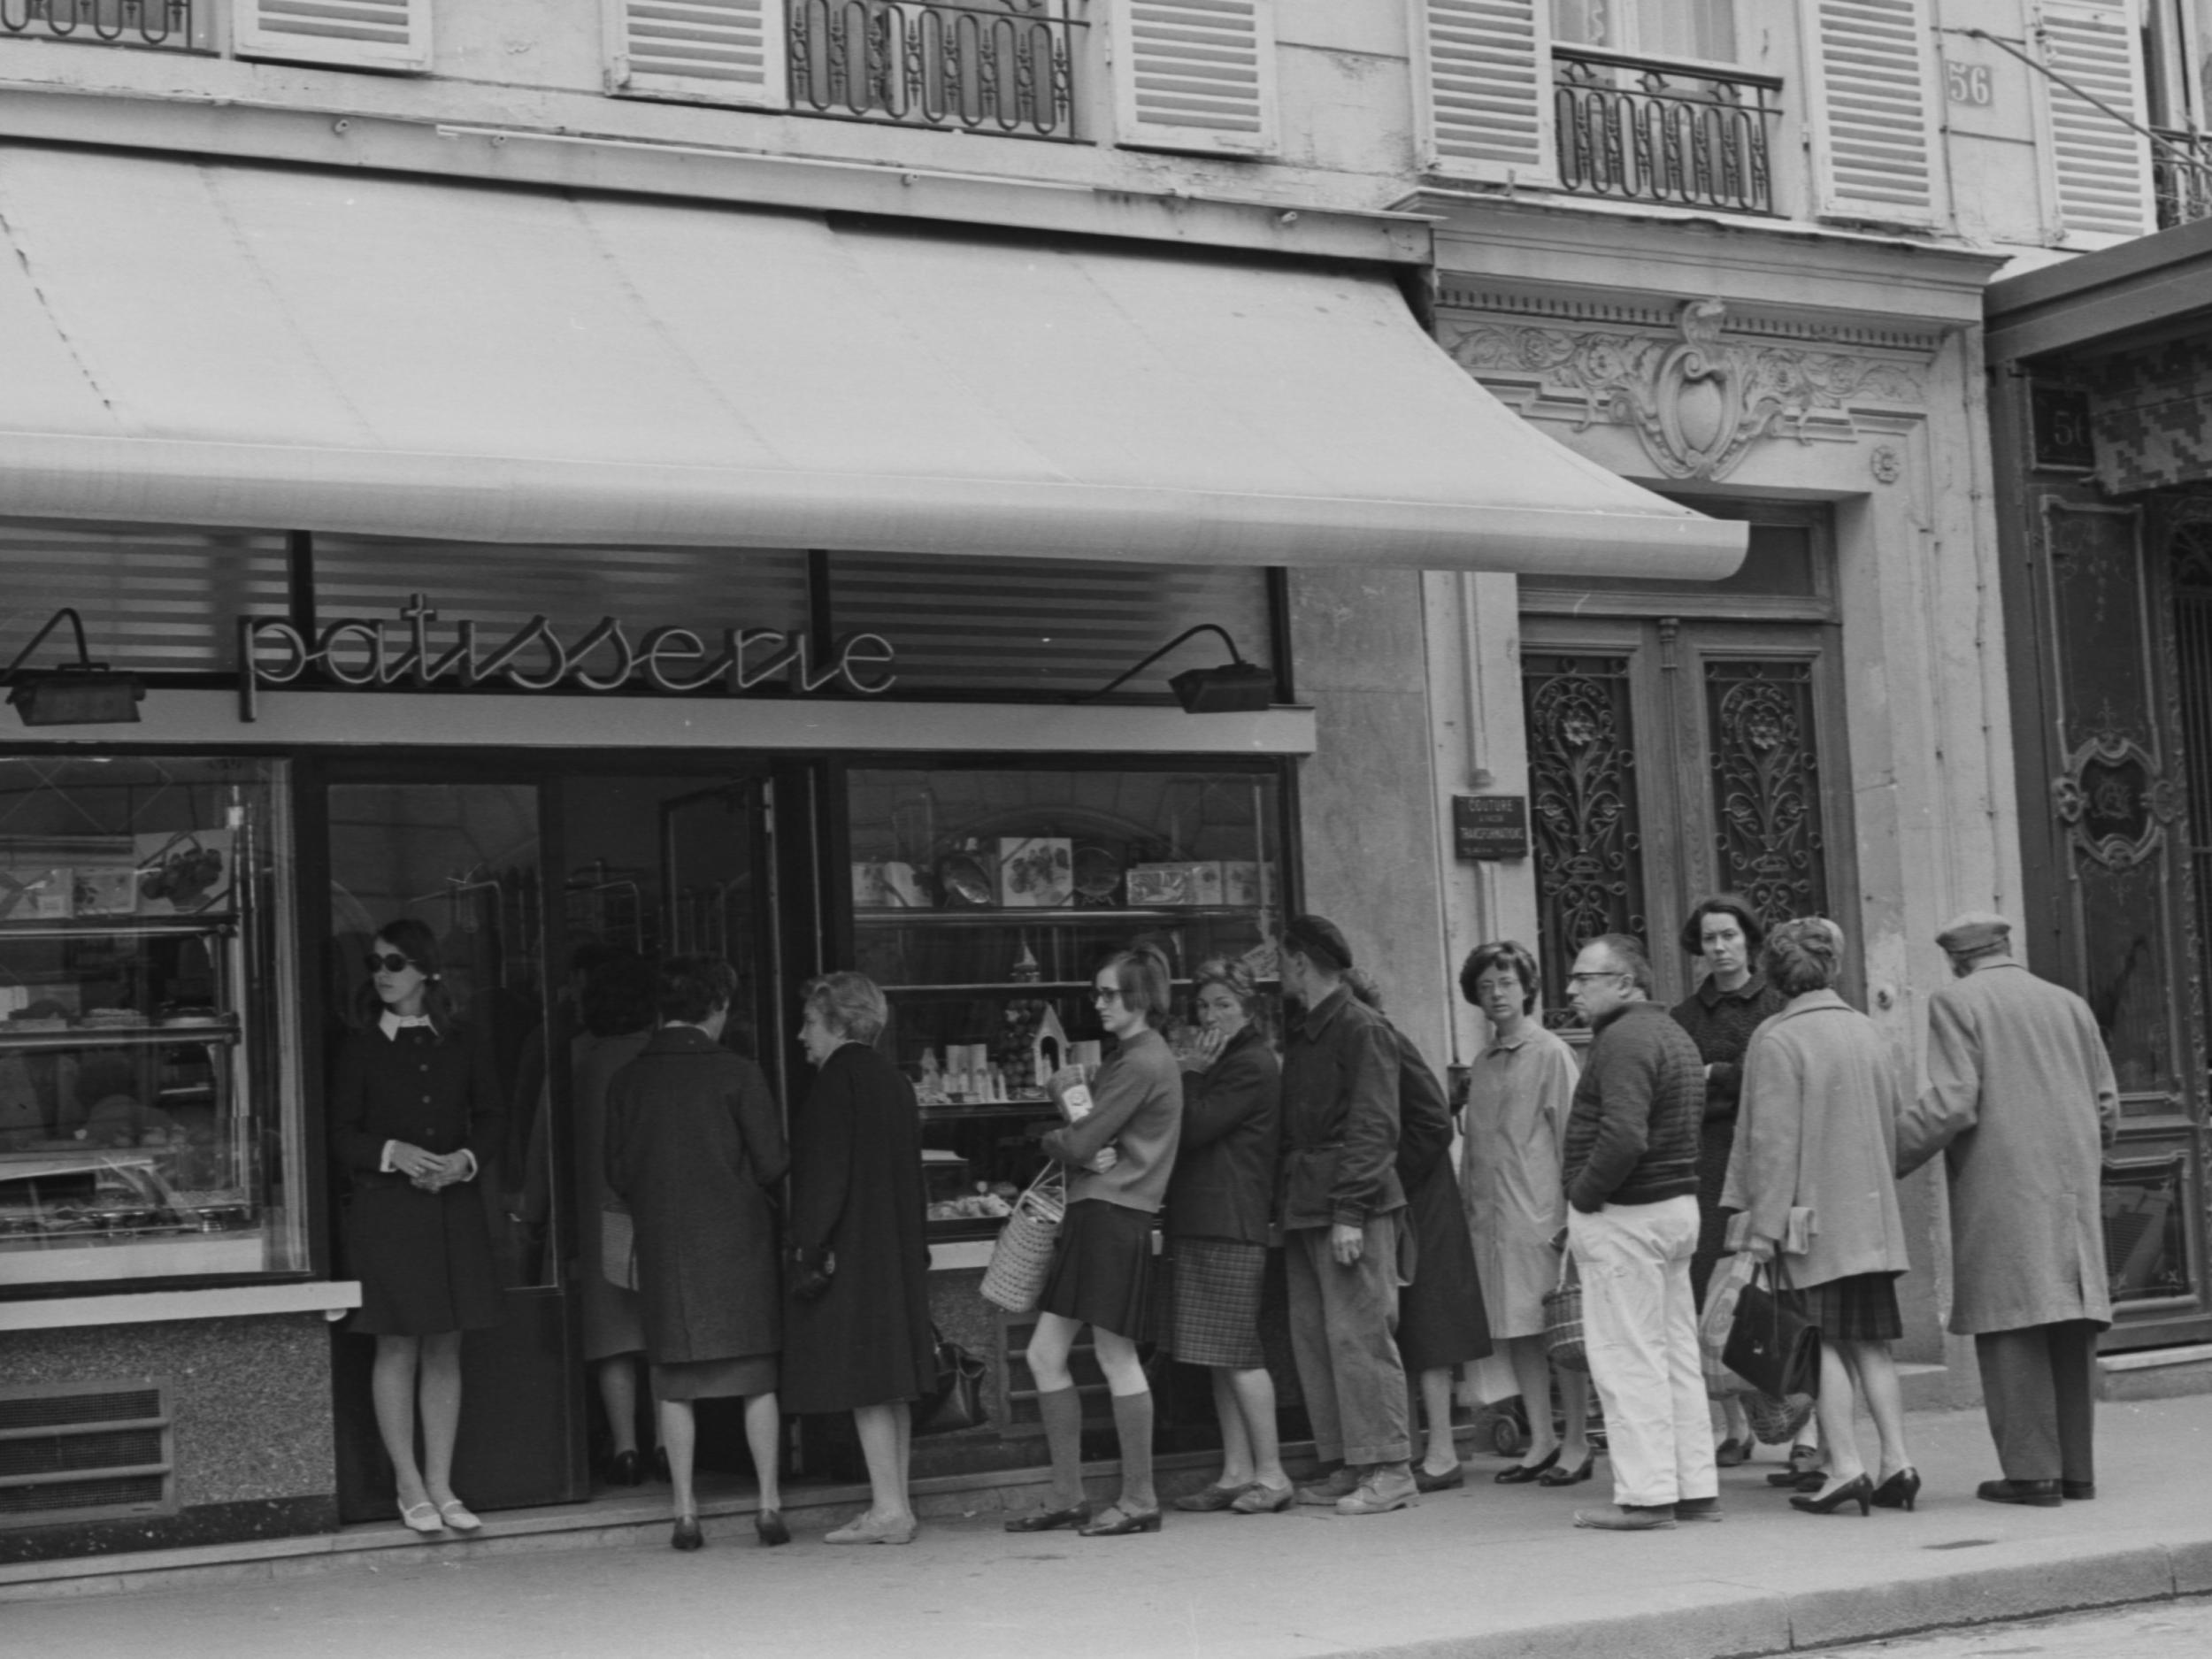 Bakeries have a longstanding tradition of being the go-to for French people’s biggest personal events